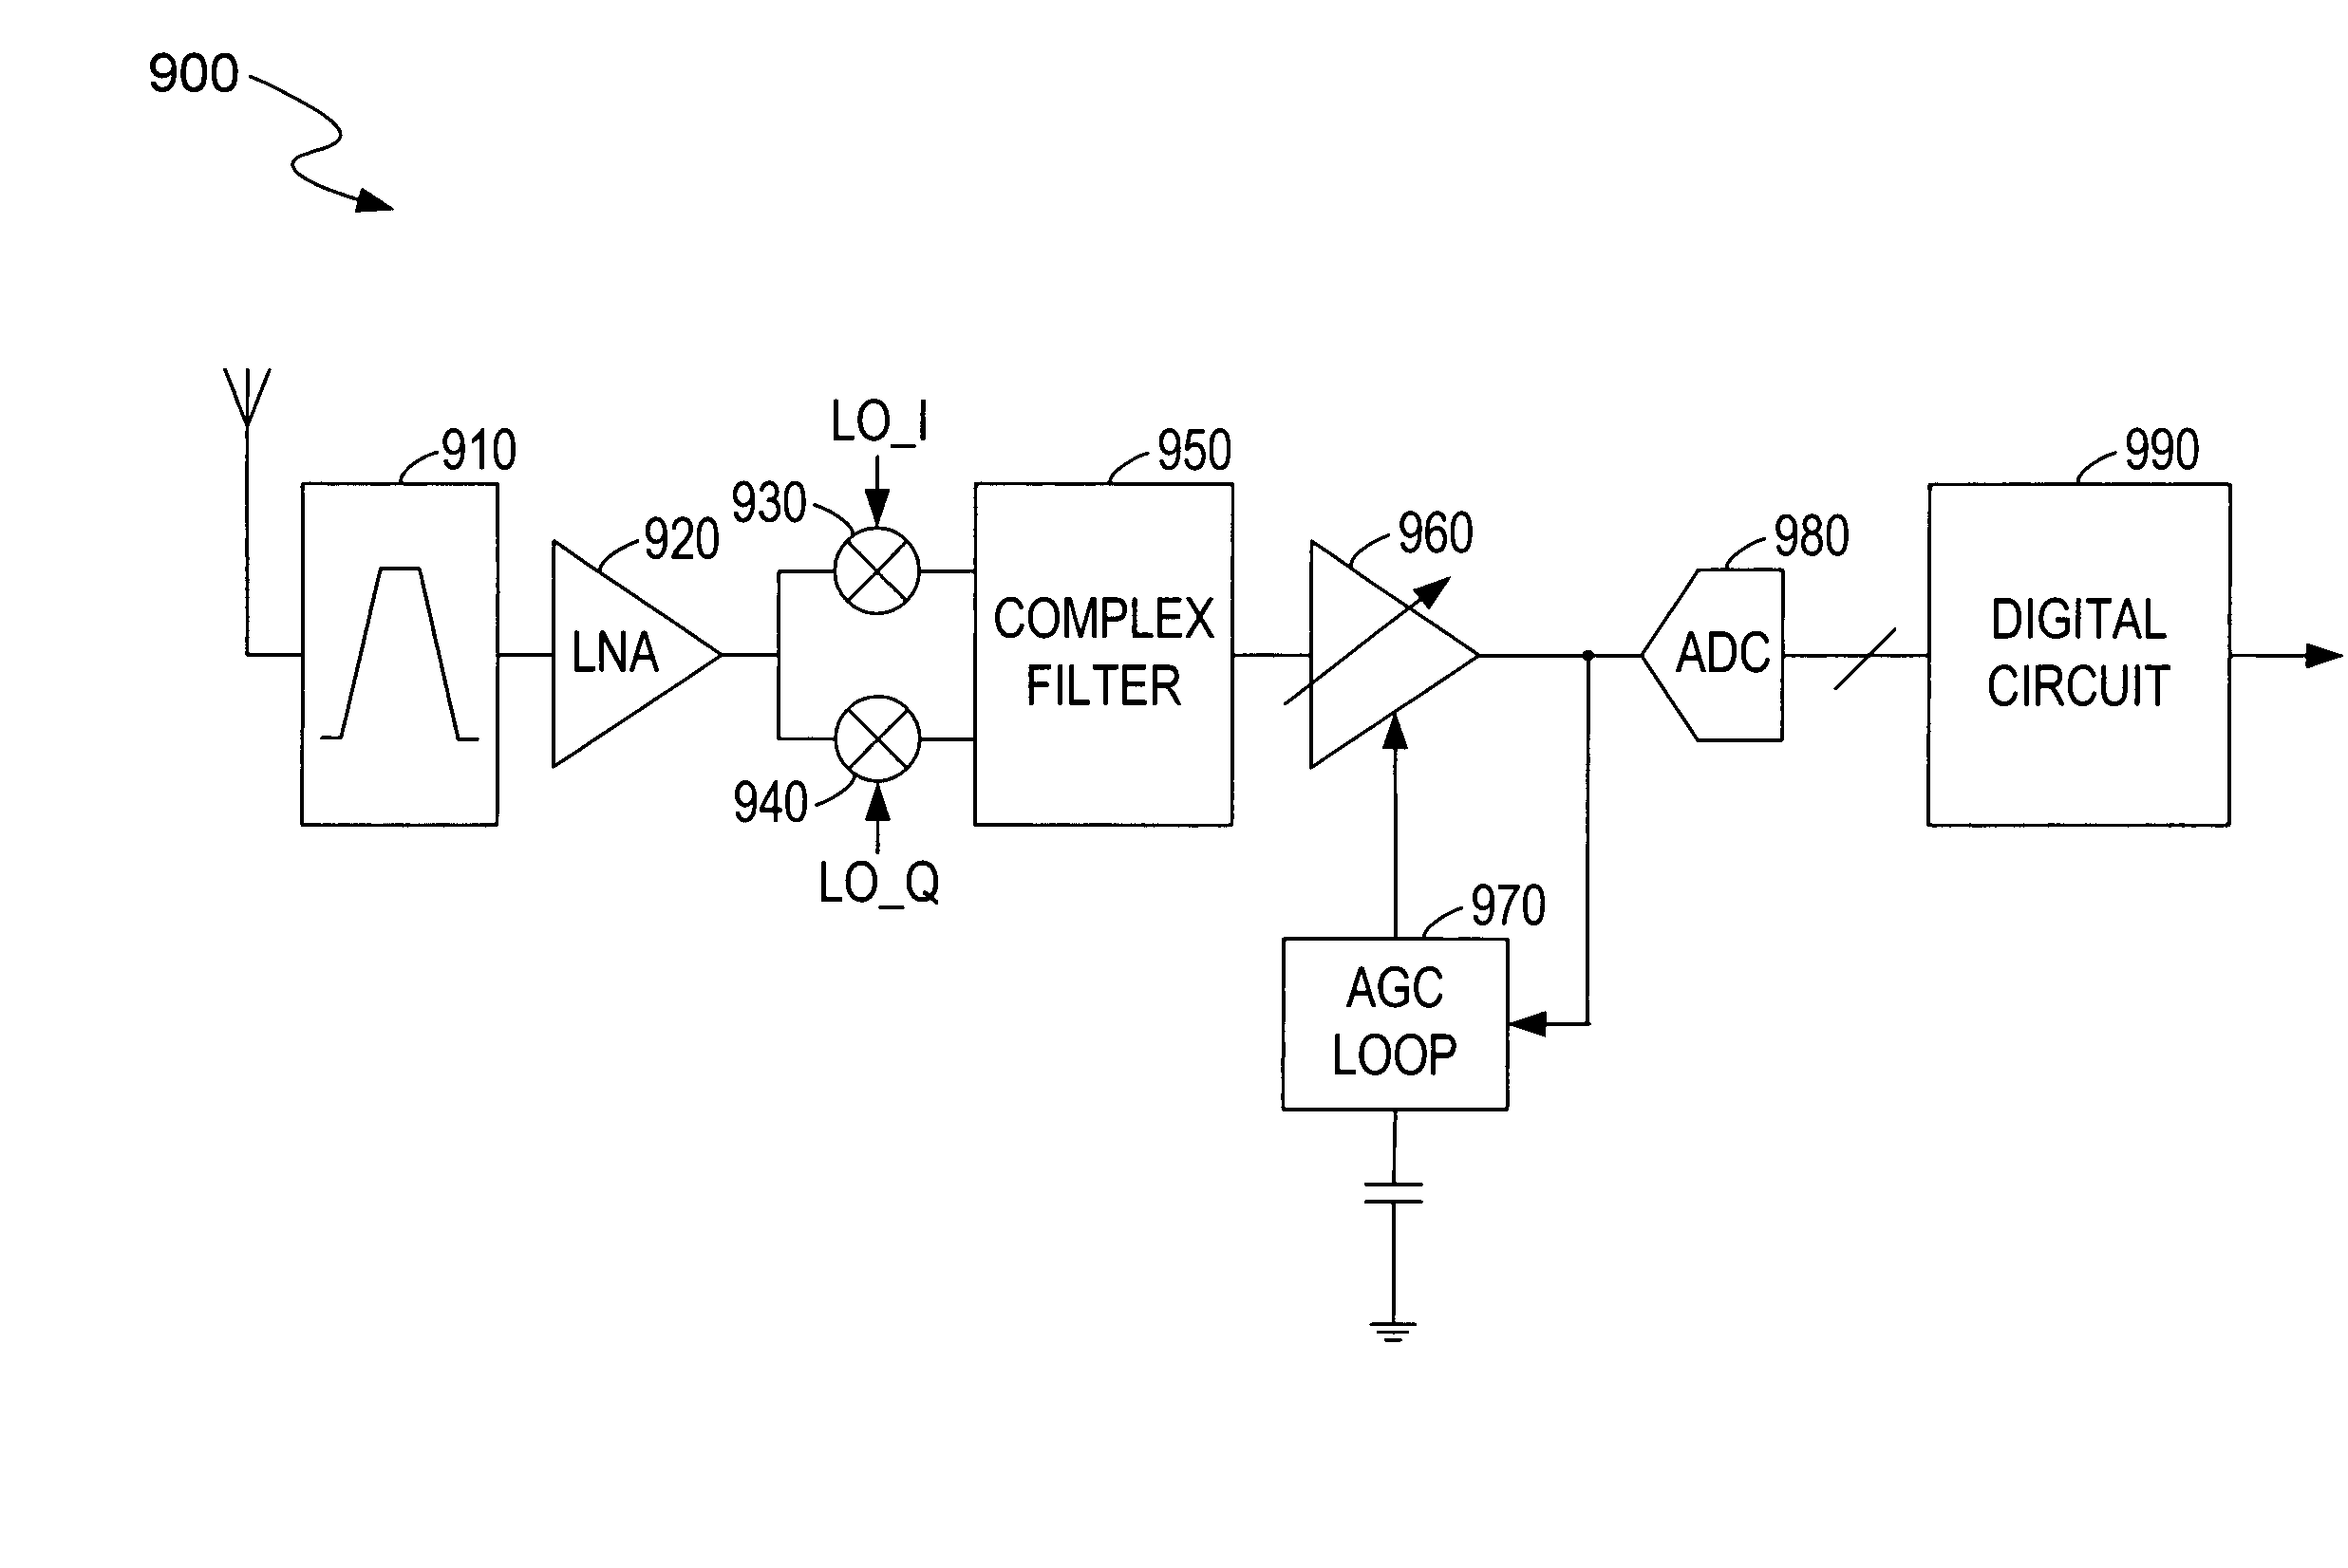 Complex filter with automatic tuning capabilities